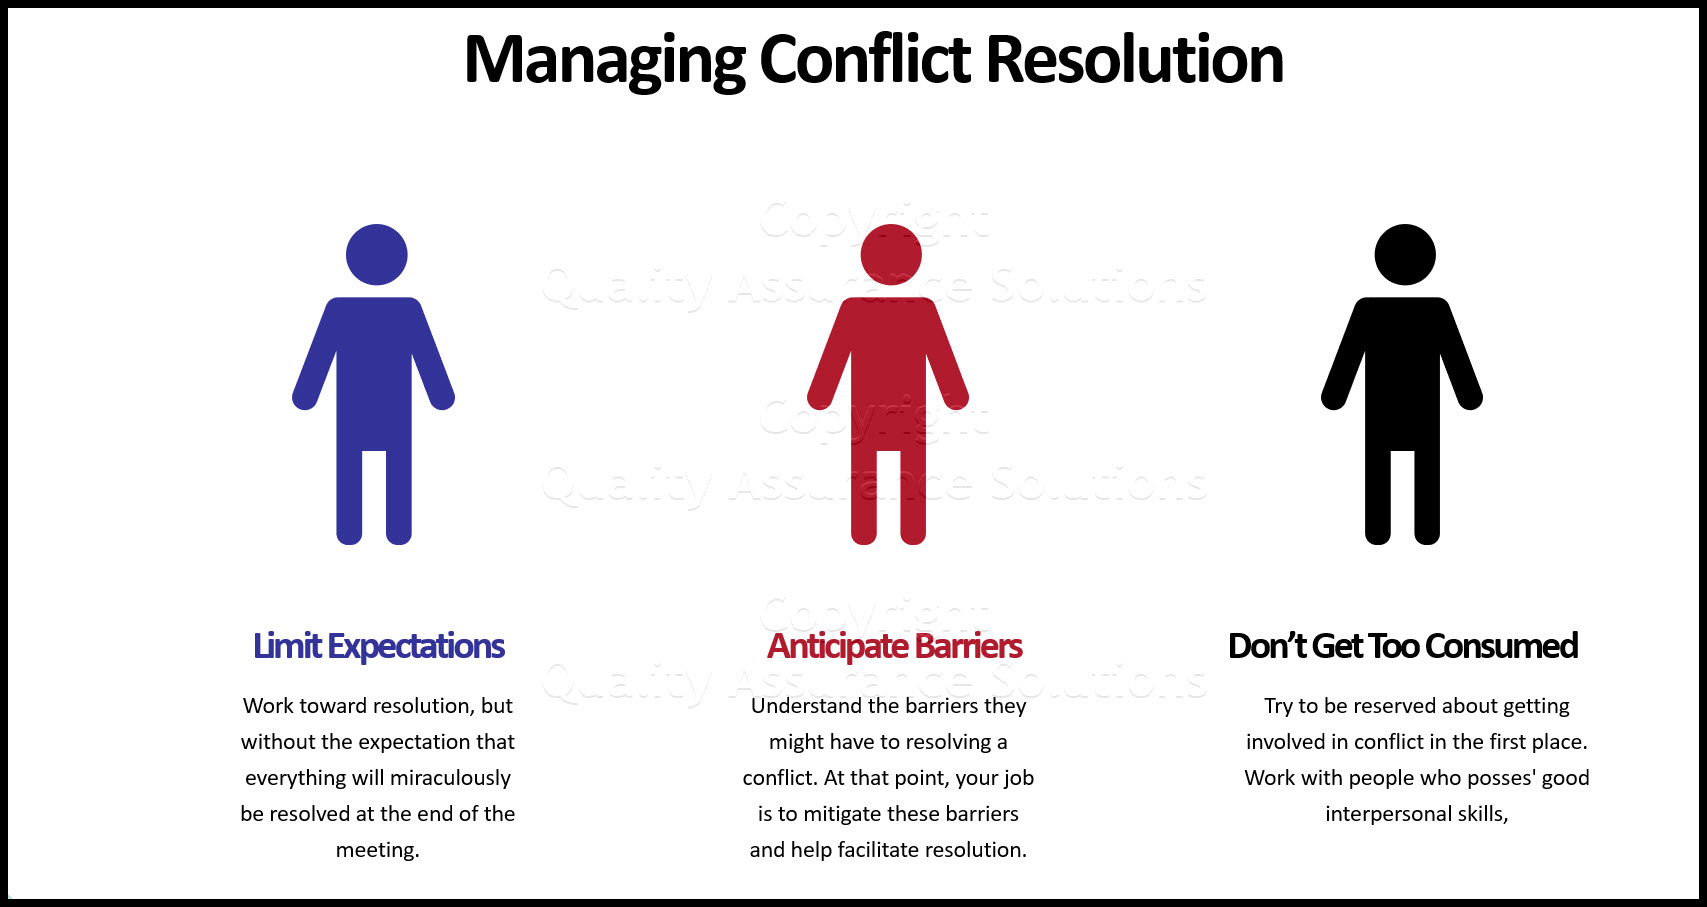 conflict handling styles problem solving